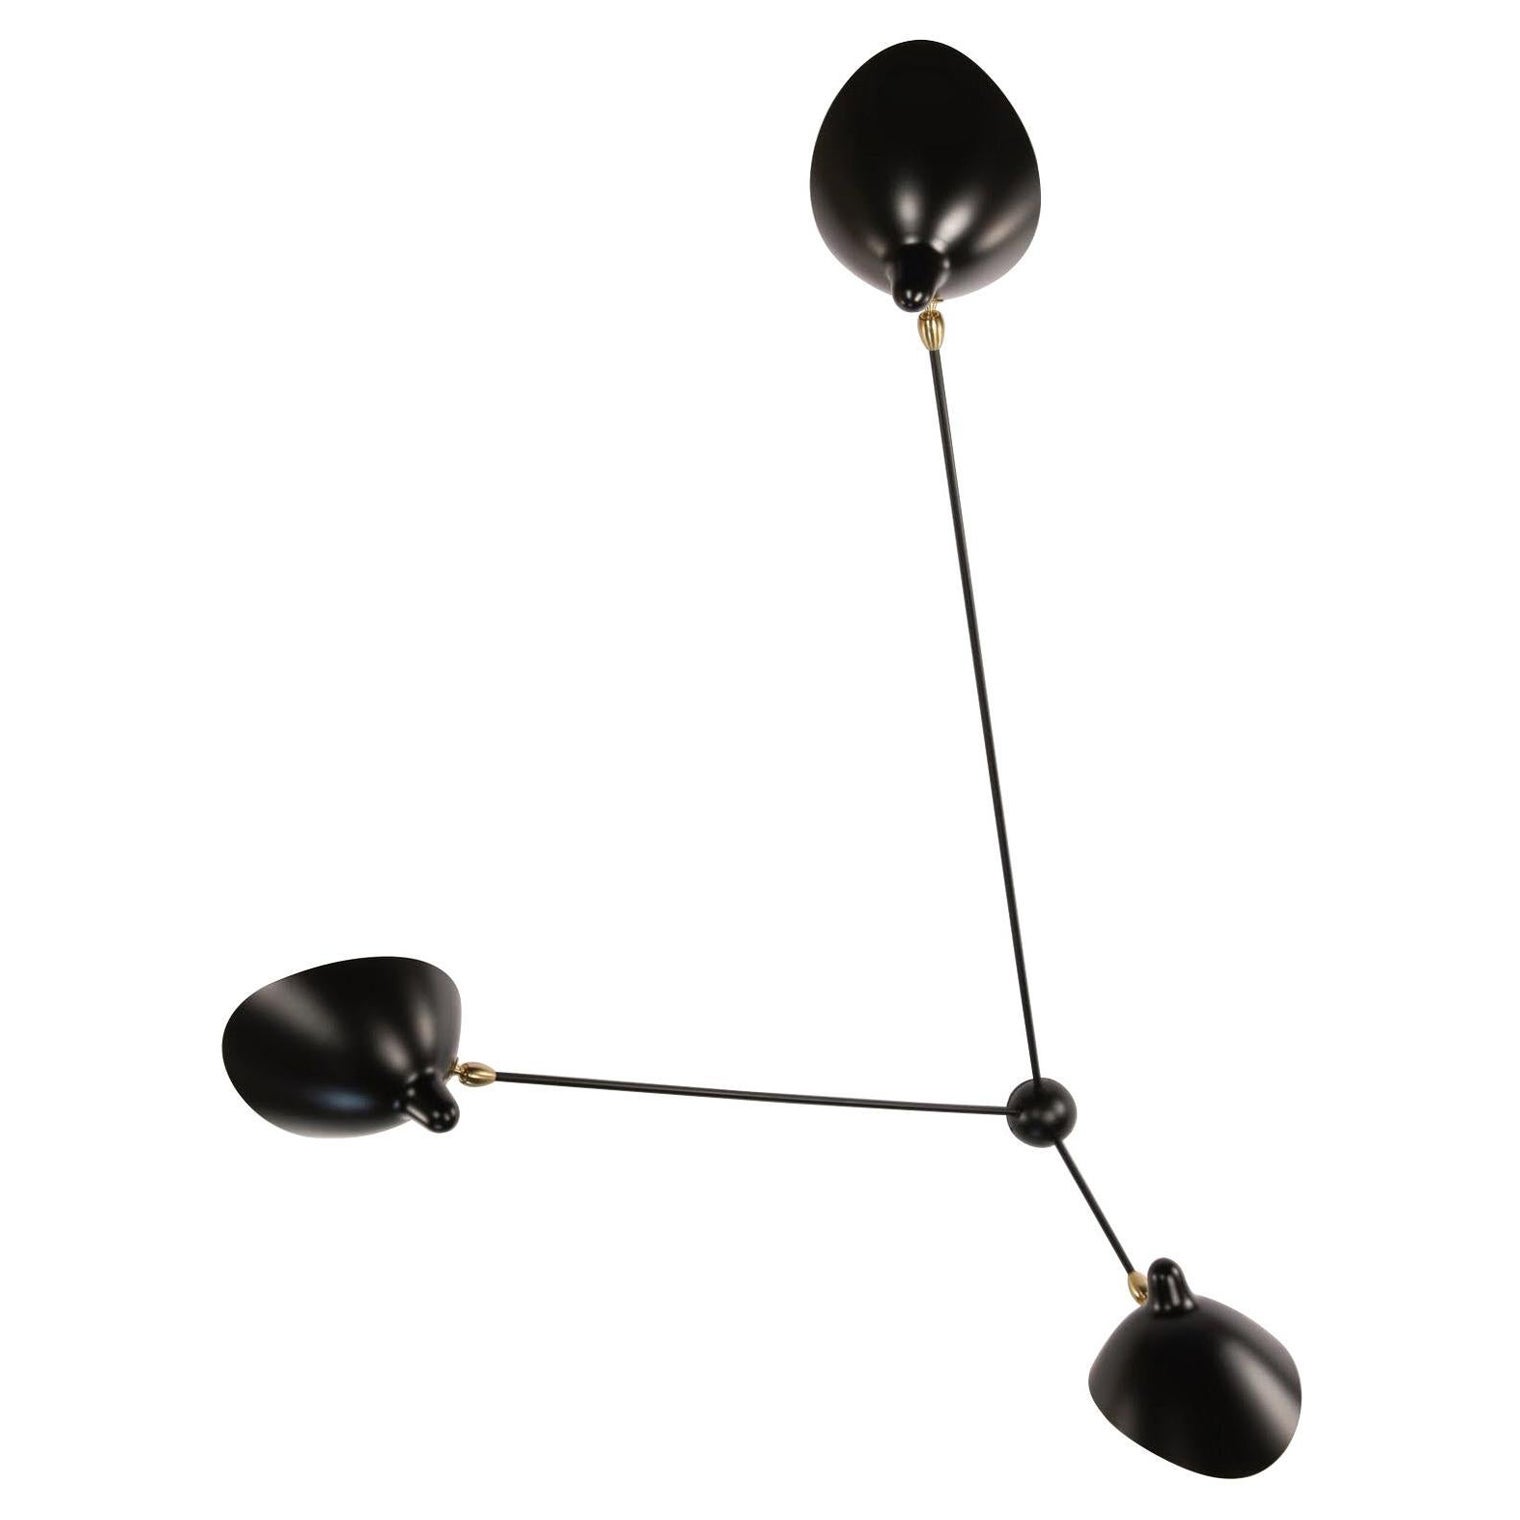  Serge Mouille - Spider Sconce with 3 Arms in Black - IN STOCK! For Sale